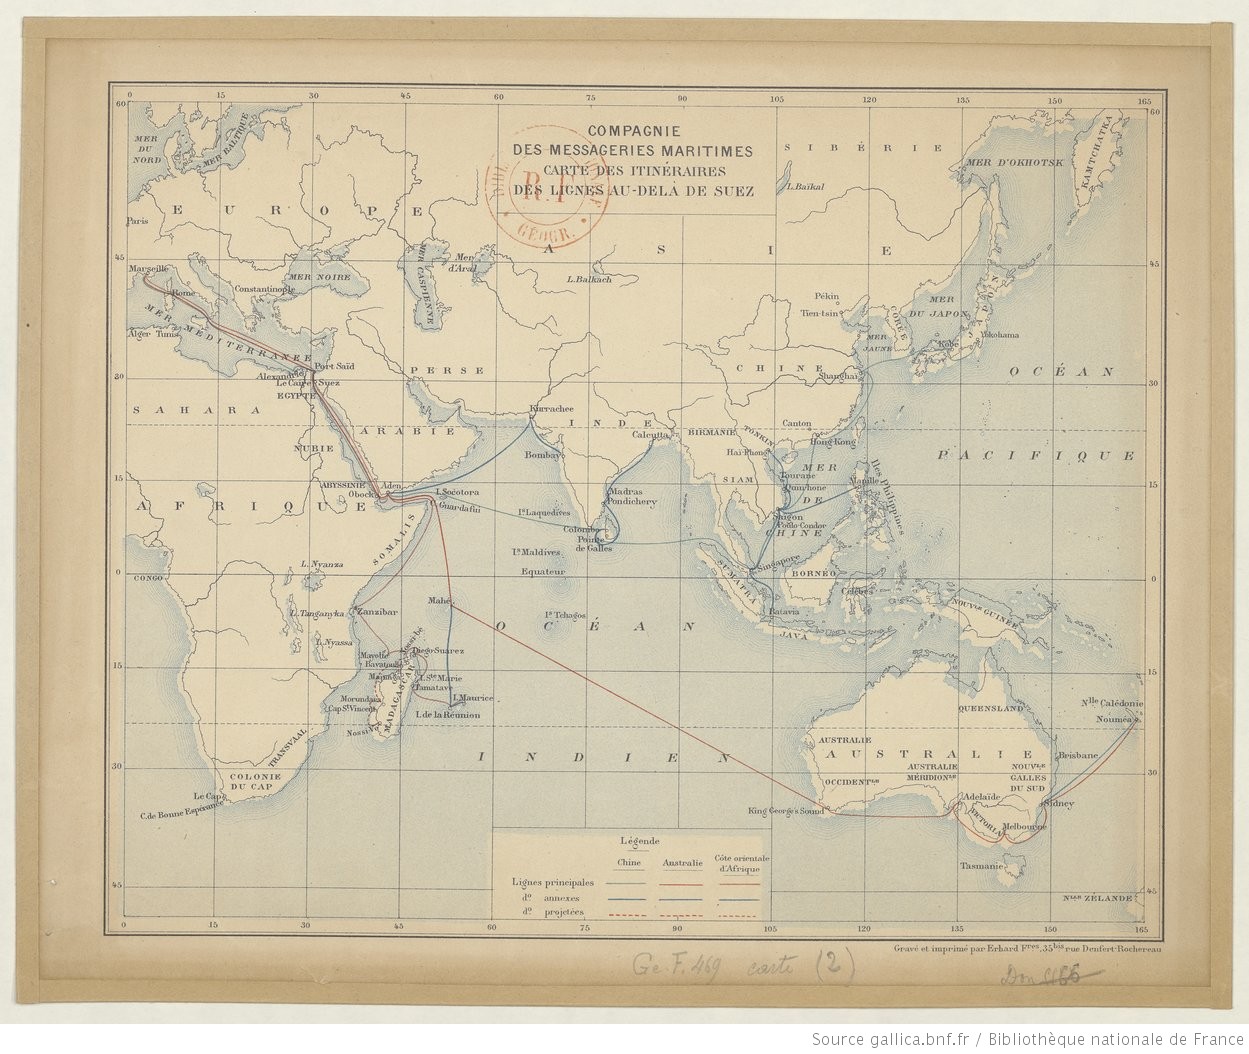 Shipping Company Route Map from 1889